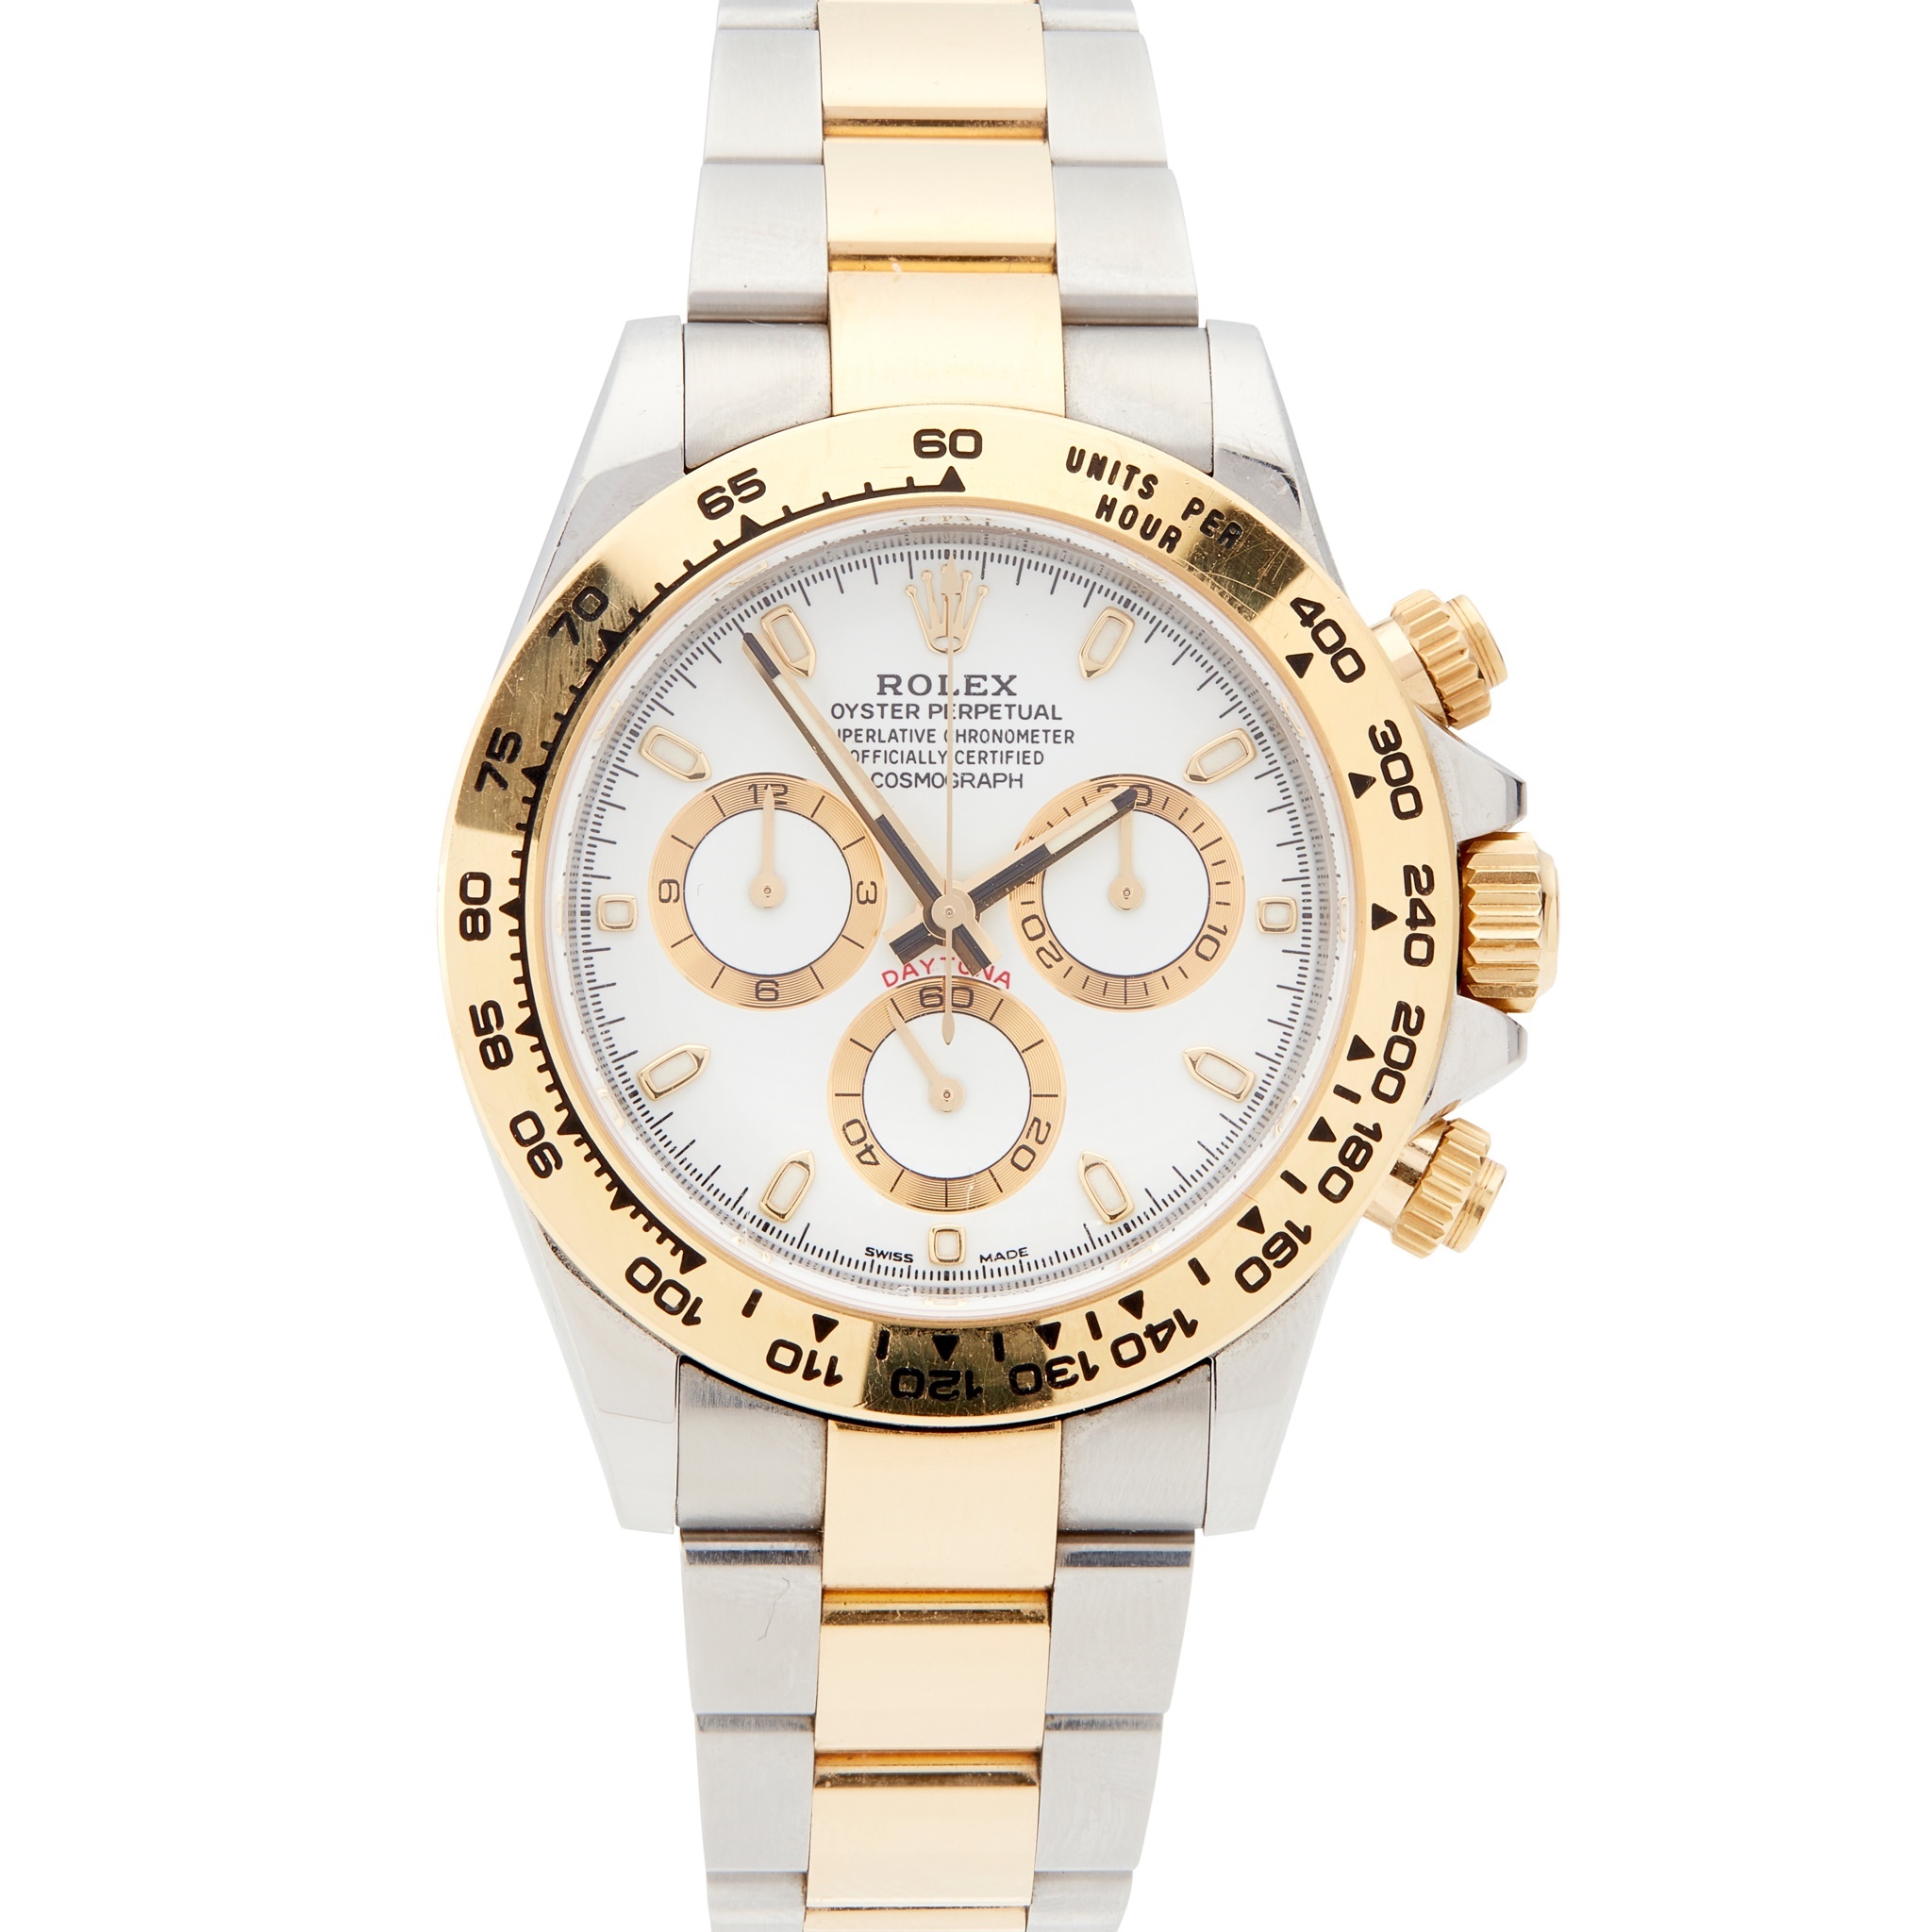 A BI-METALLIC OYSTER PERPETUAL COSMOGRAPH DAYTONA WRISTWATCH, BY ROLEX | Sold for £15,000 incl premium